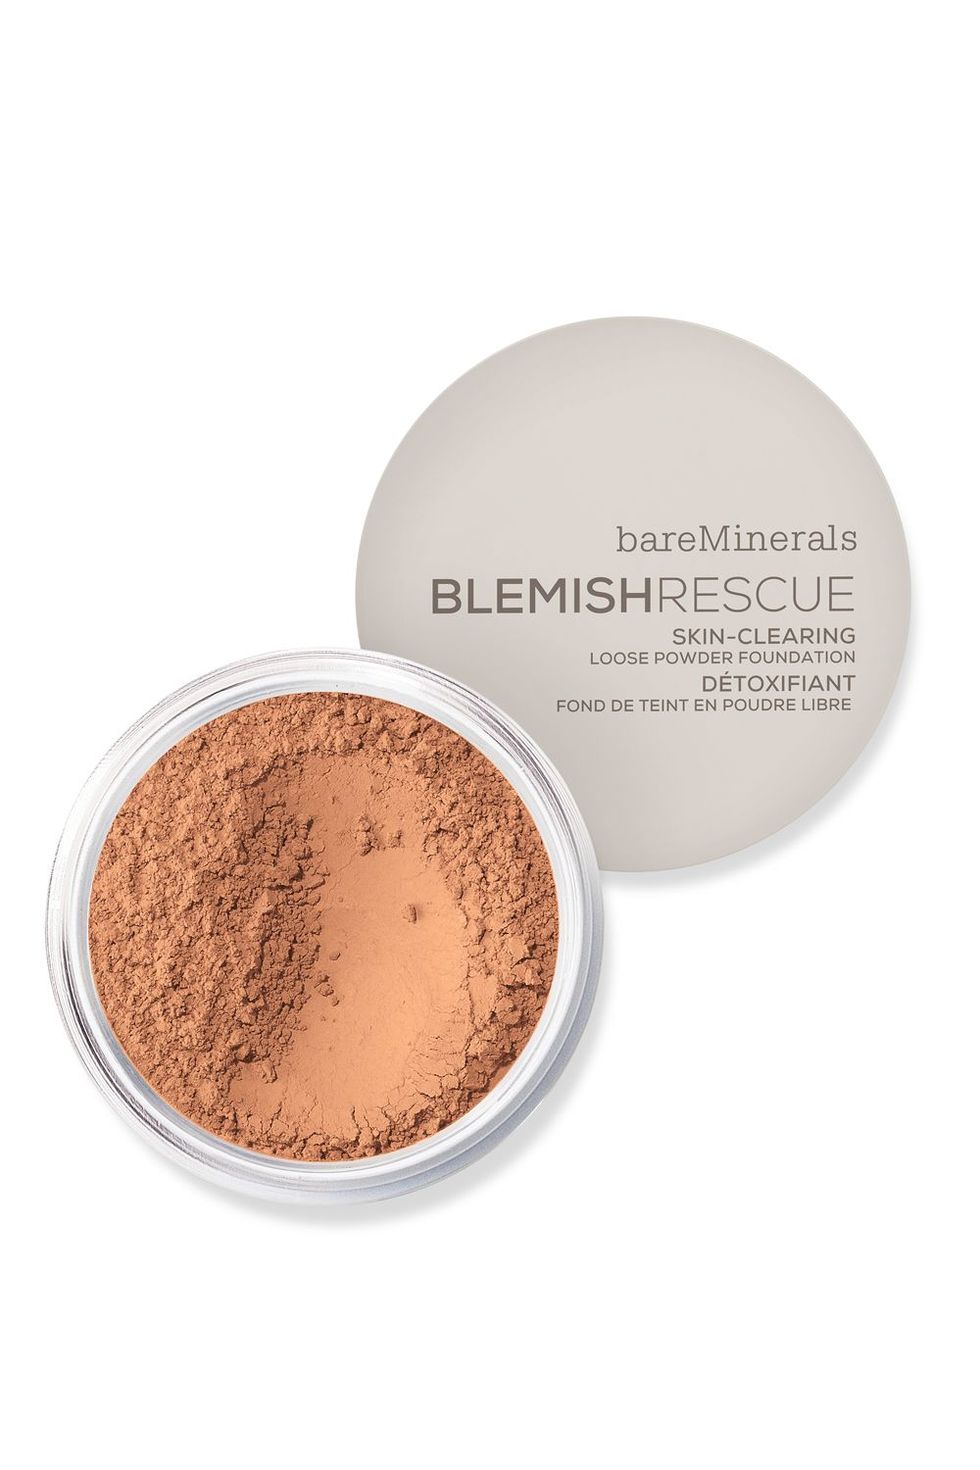 BareMinerals Blemish Rescue Skin-Clearing Loose Powder Foundation